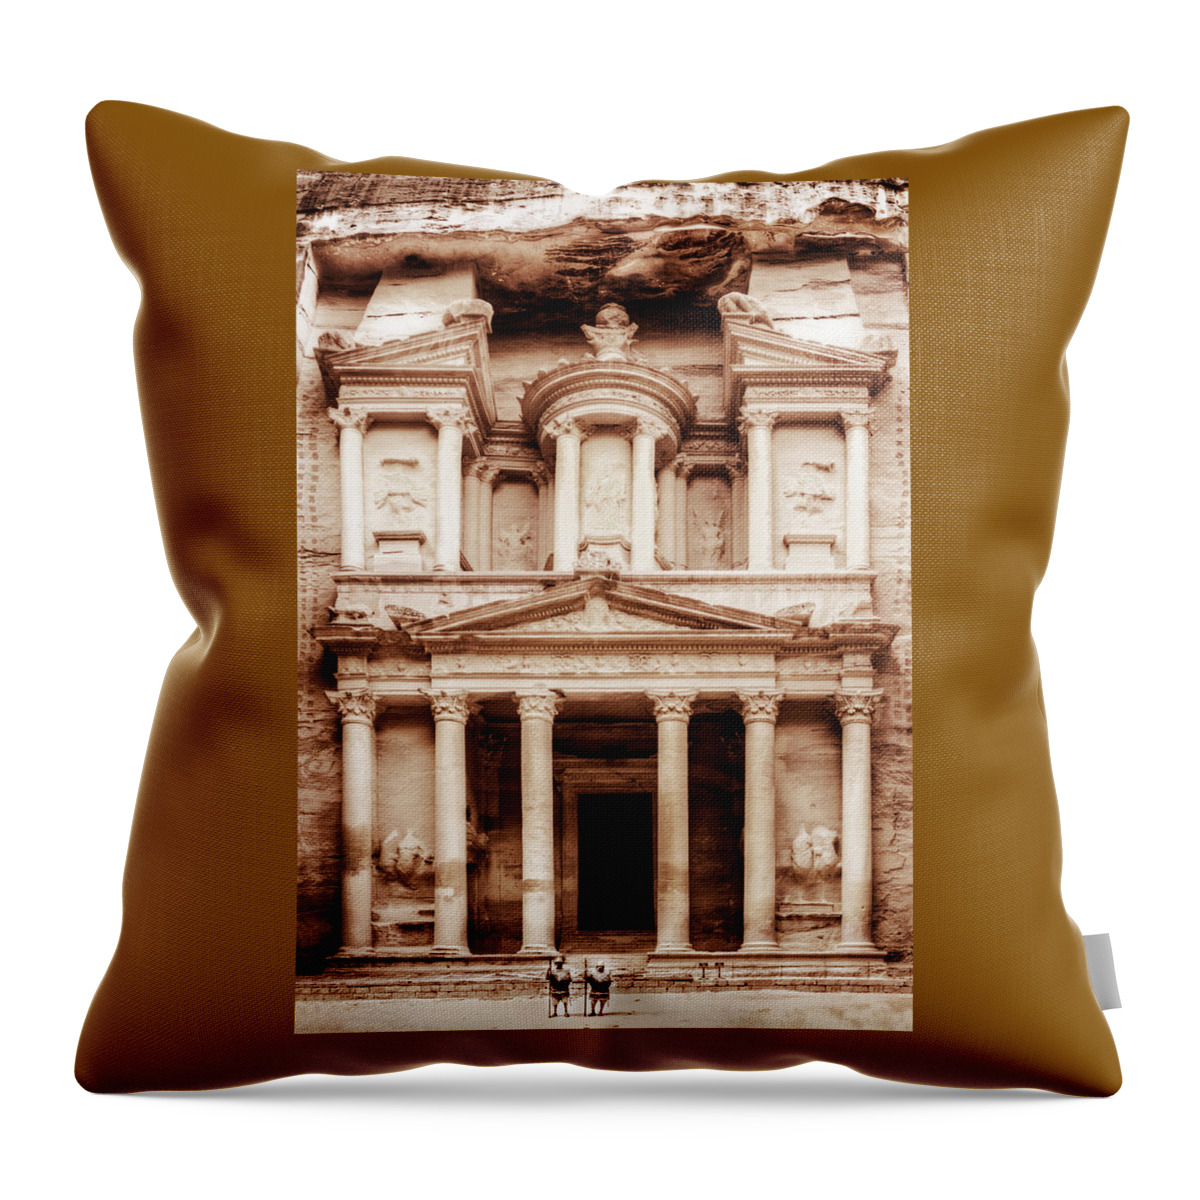 Petra Throw Pillow featuring the photograph Guarding The Petra Treasury by Nicola Nobile